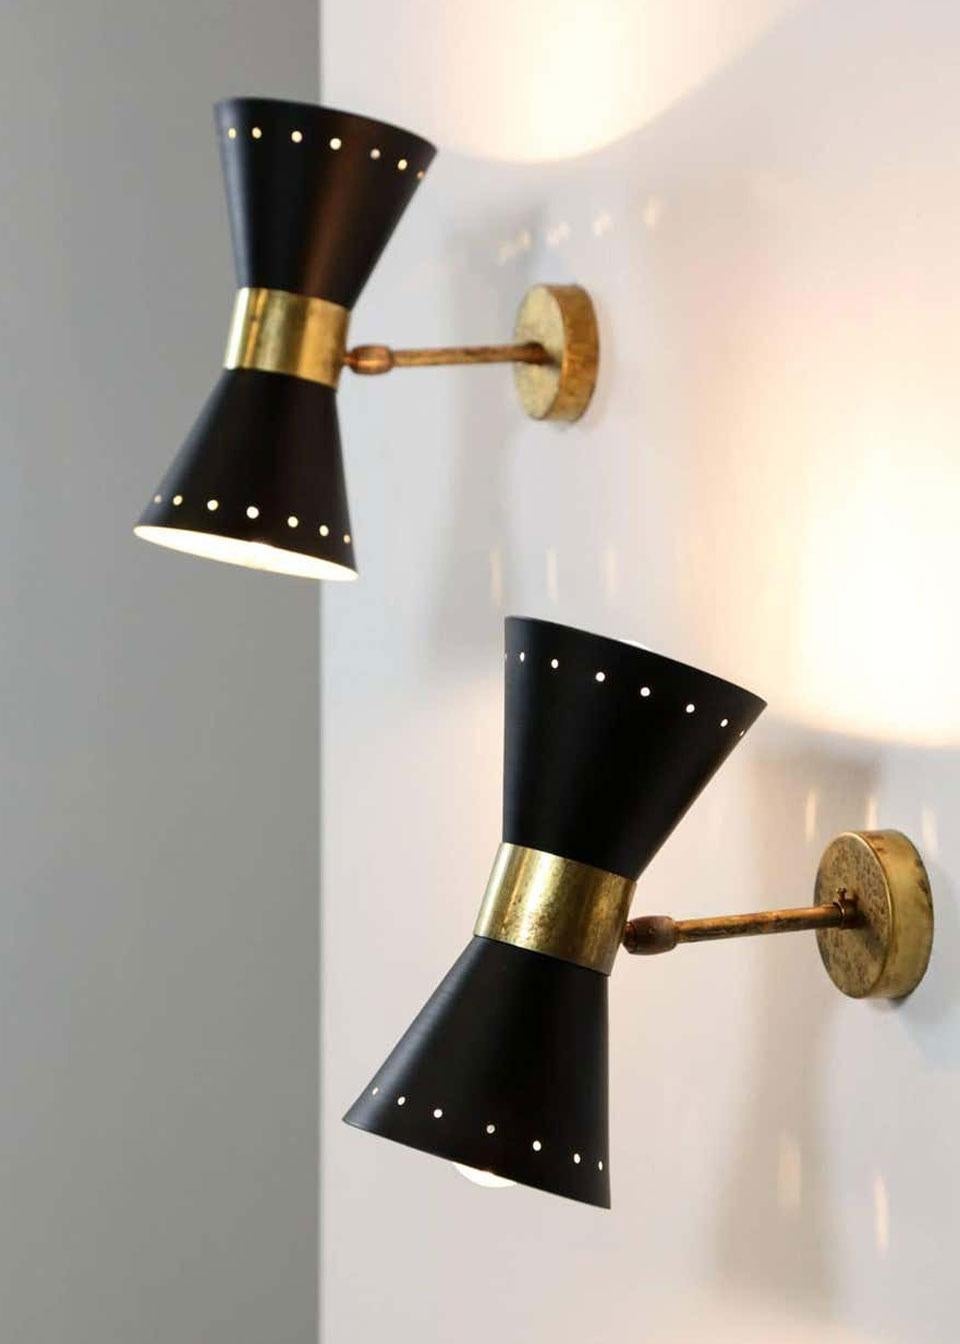 Rare set of gorgeous Italian design Diabolo wall lights of the 1950s in the style of Stilnovo.
The patinated brass combines realy well with the black metal shades.
The wall lights have been rewired for daily use and look amazing.
Each wall light